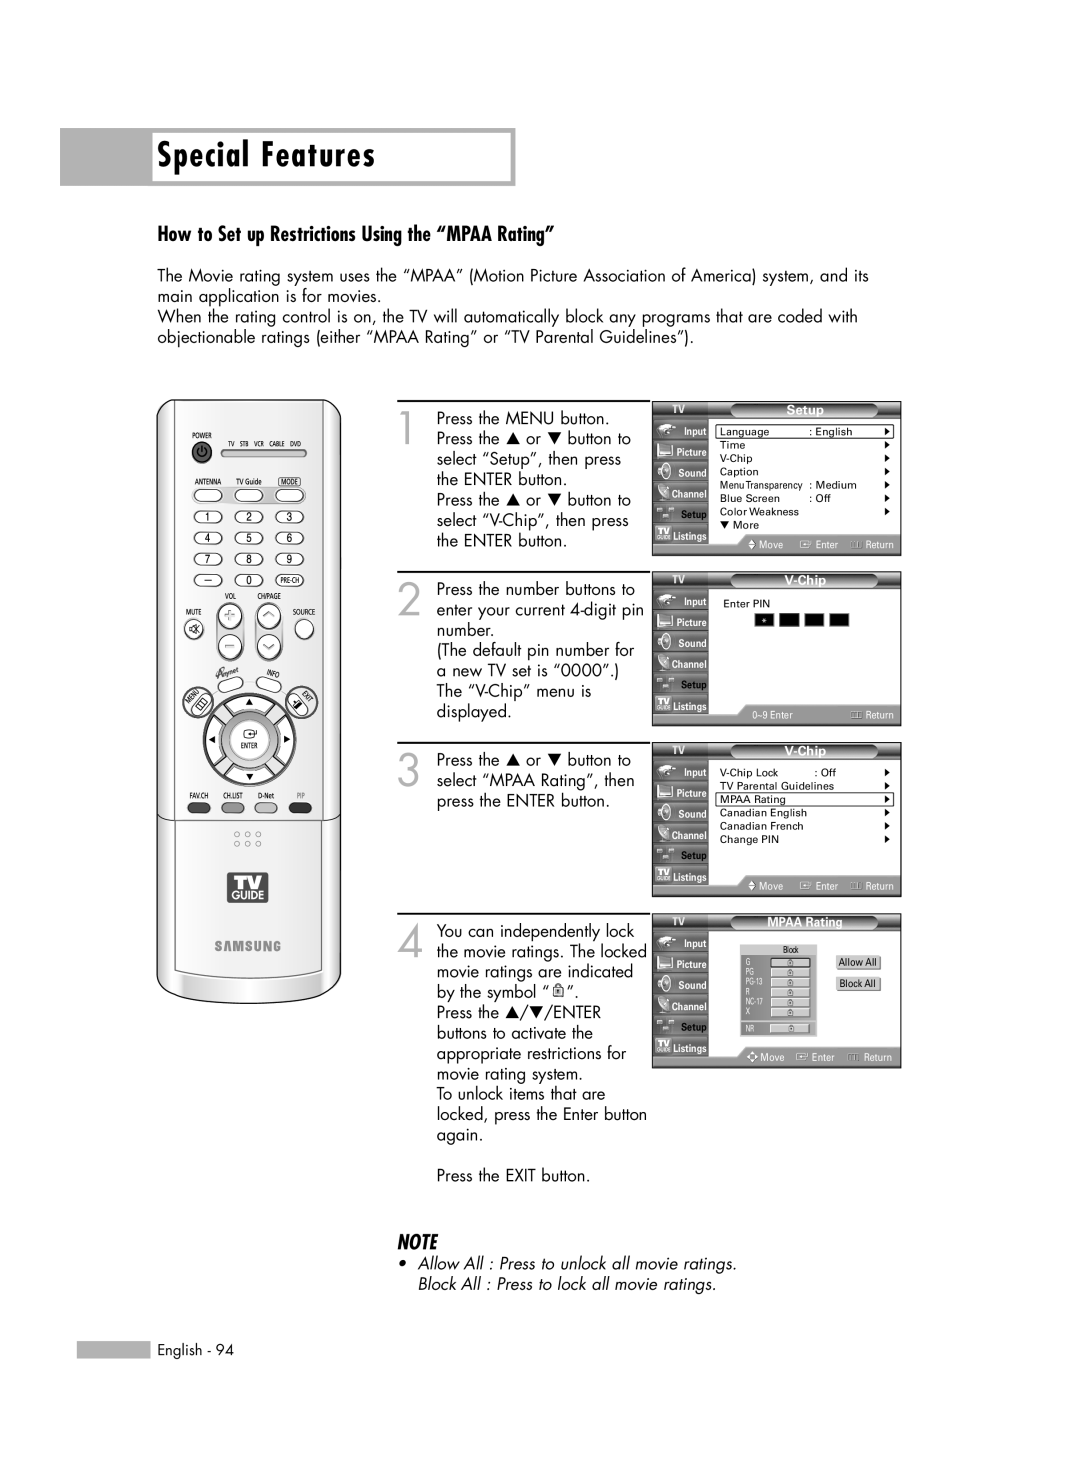 Samsung HL-R5688W manual How to Set up Restrictions Using the “MPAA Rating”, Special Features 